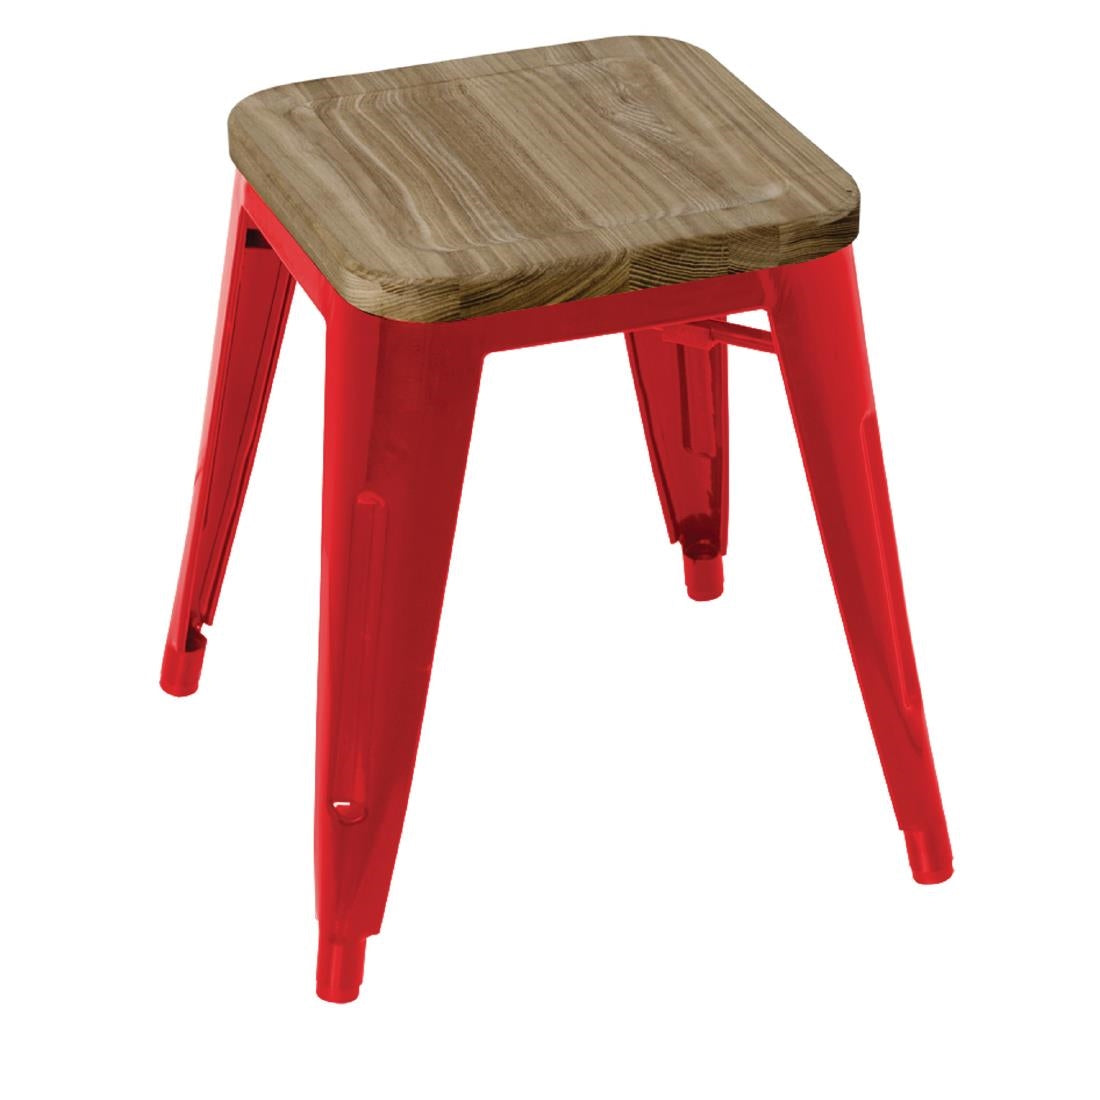 GM637 Bolero Bistro Low Stools with Wooden Seat Pad Red (Pack of 4)